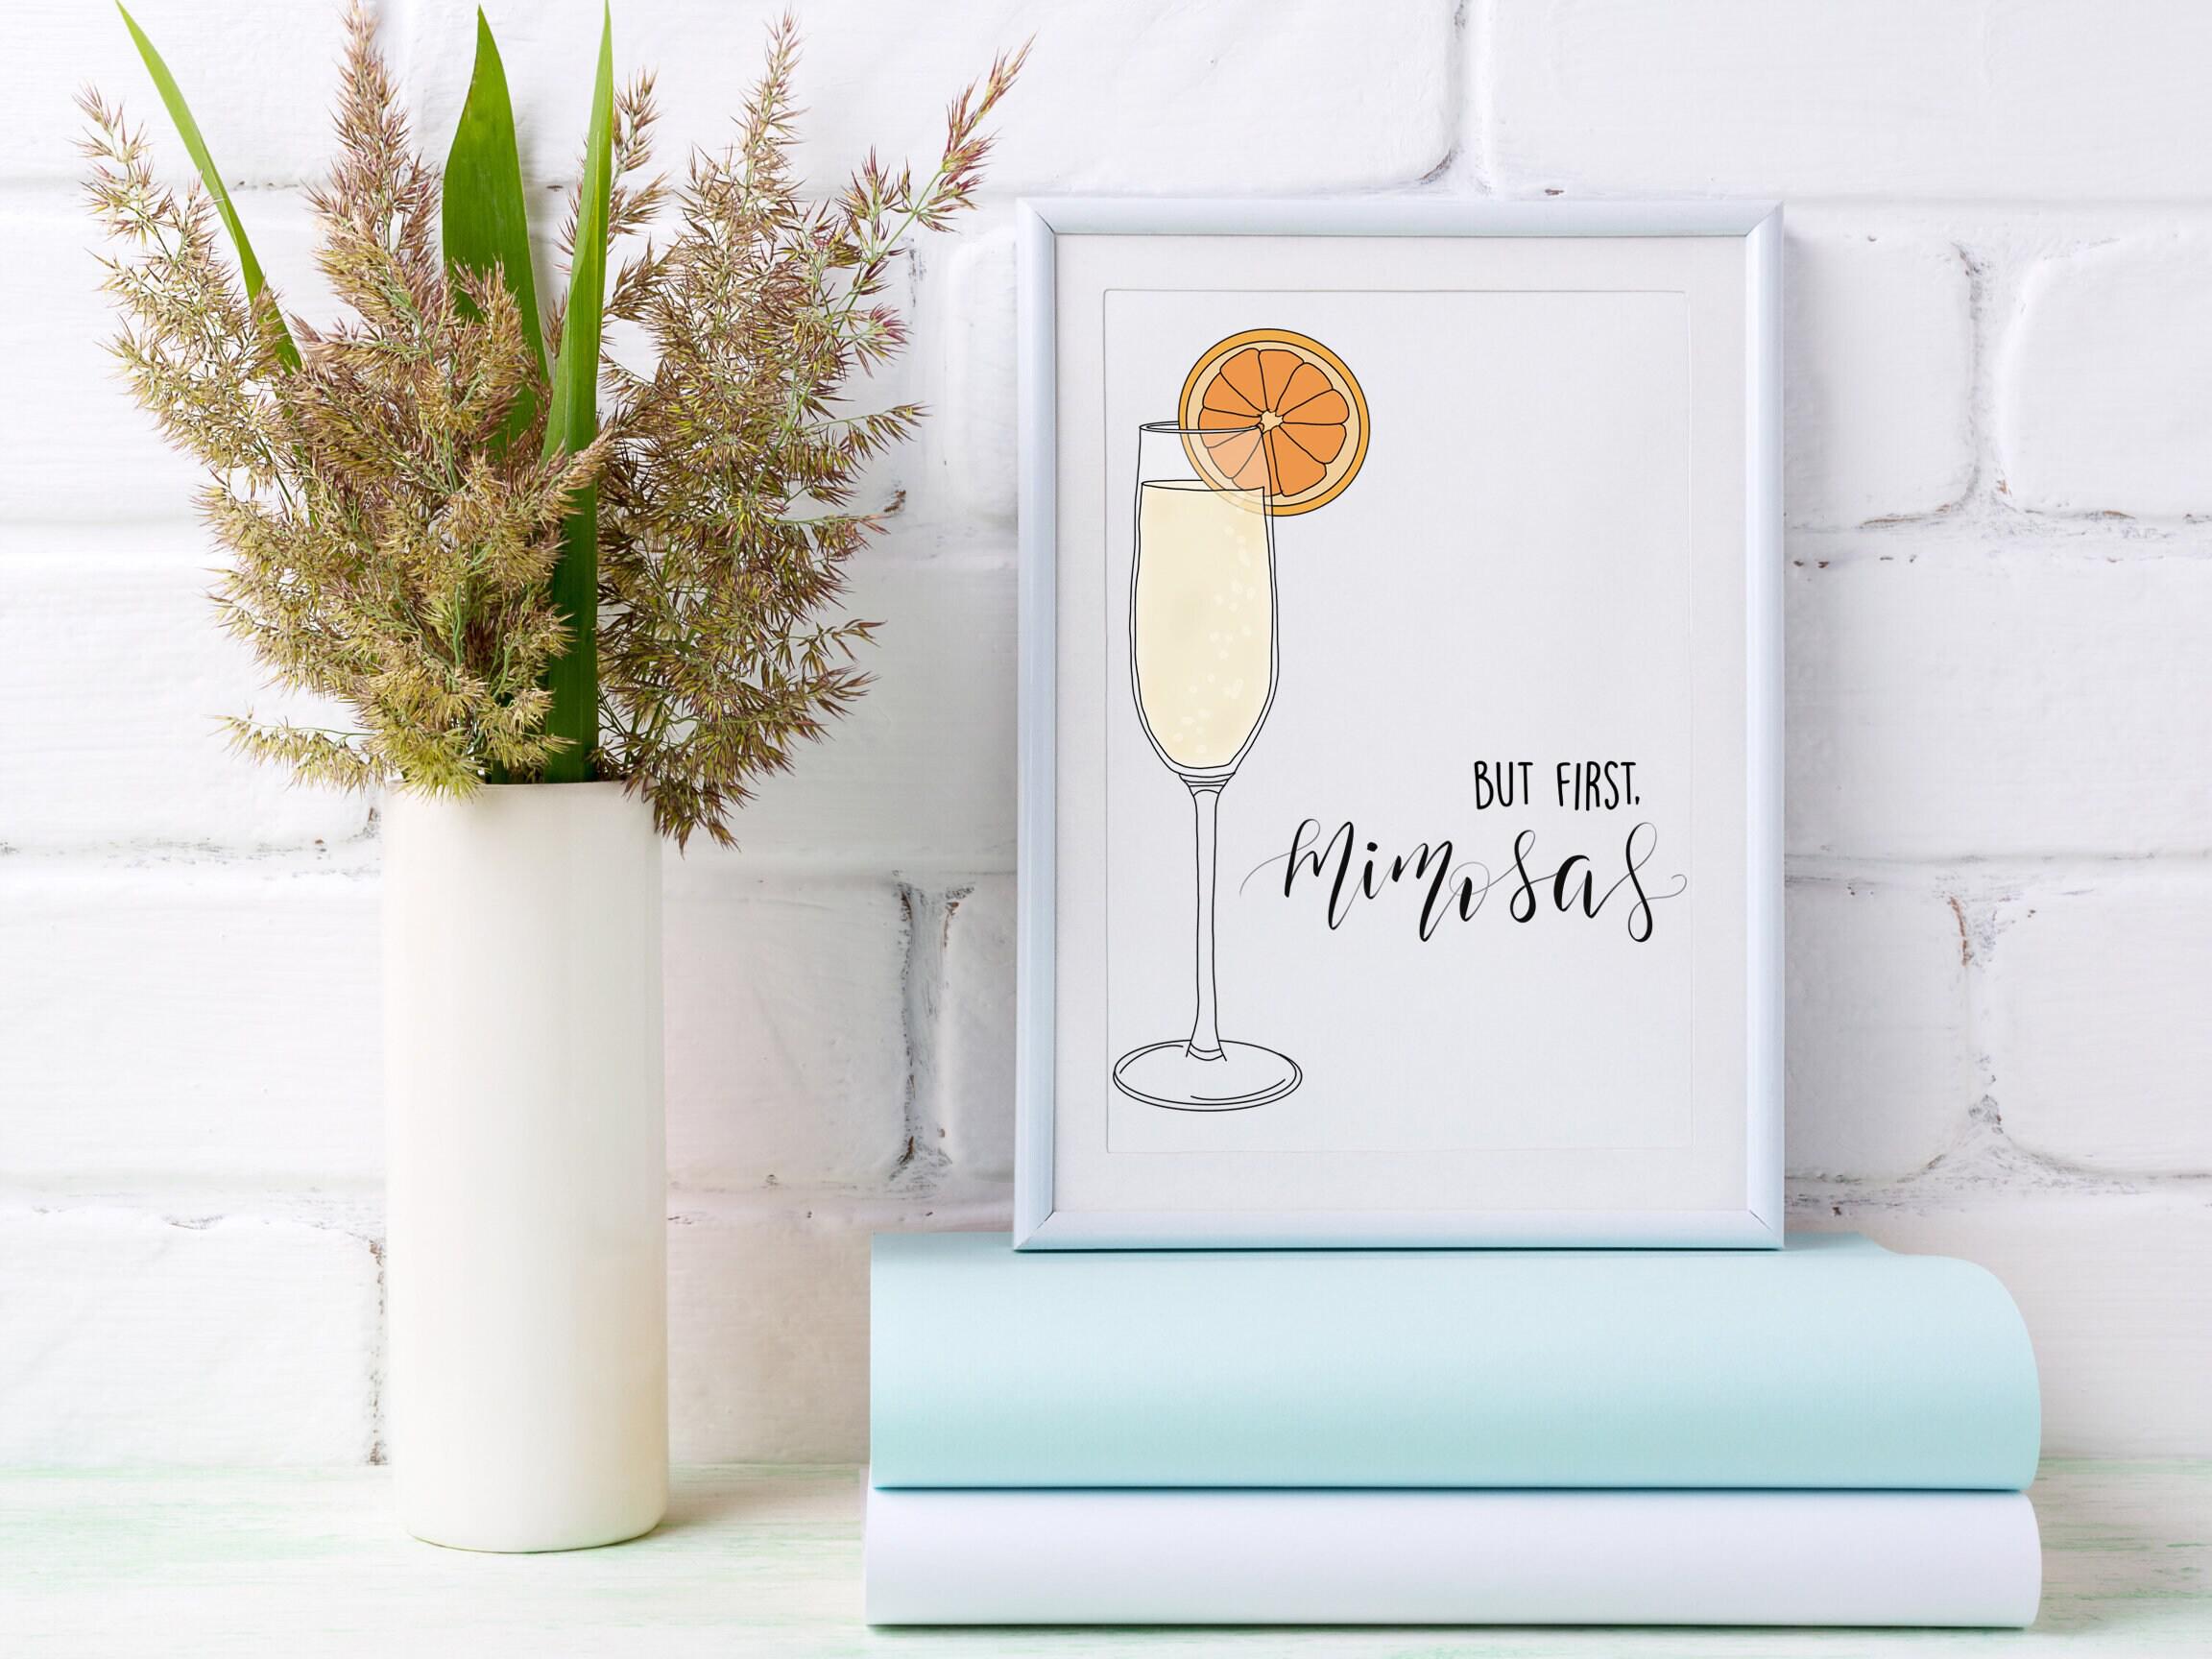 Rose Gold Mimosa Bar Sign with juice tags - Bride + Bows